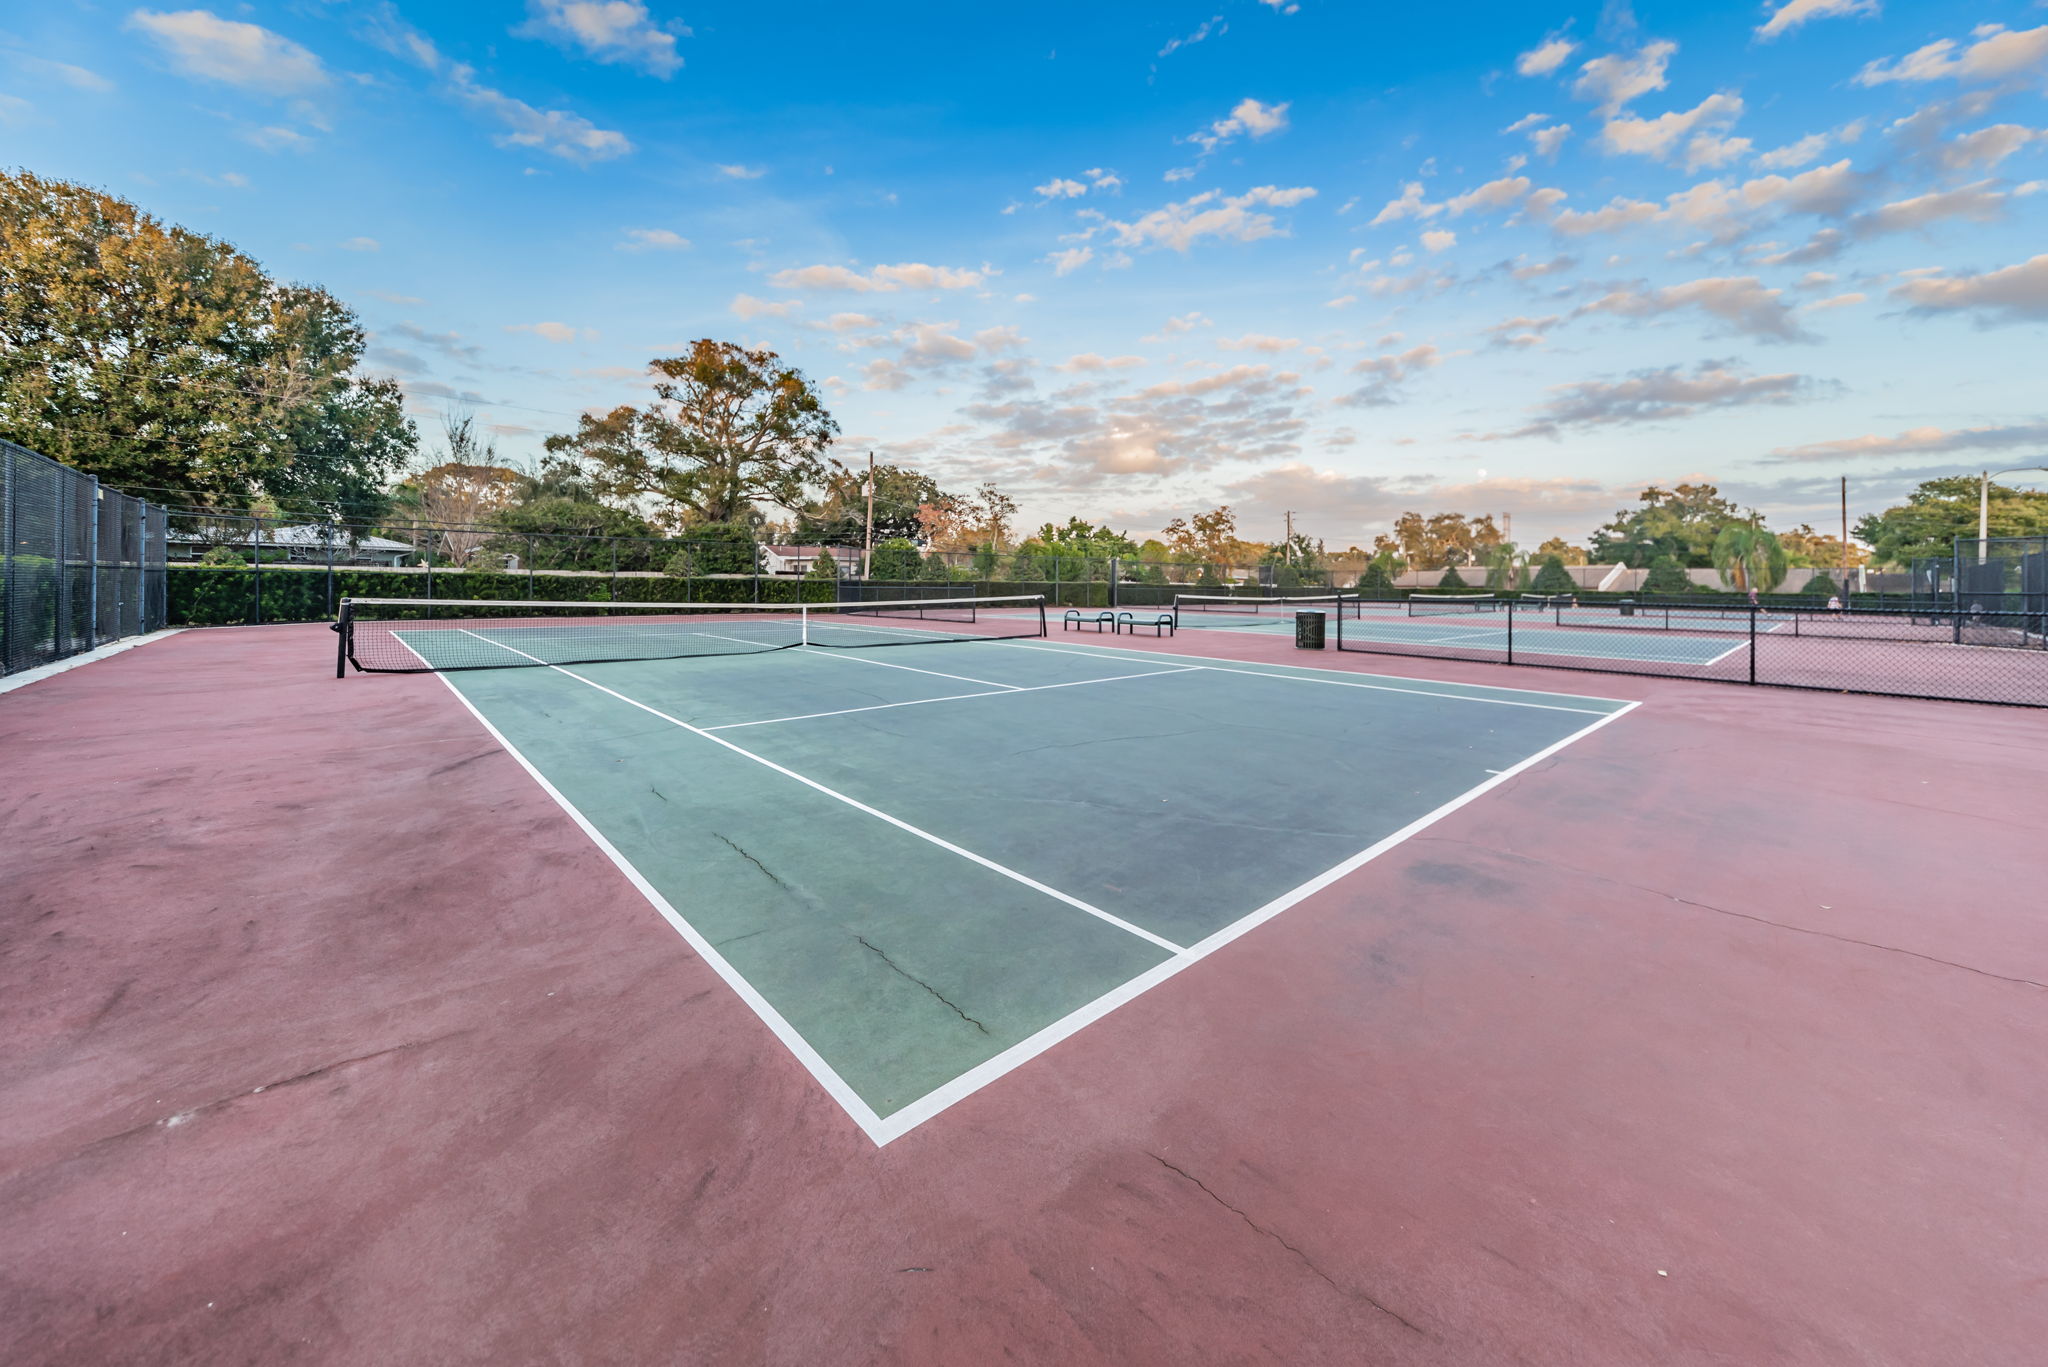 19-Morningside Recreational Complex Tennis Courts